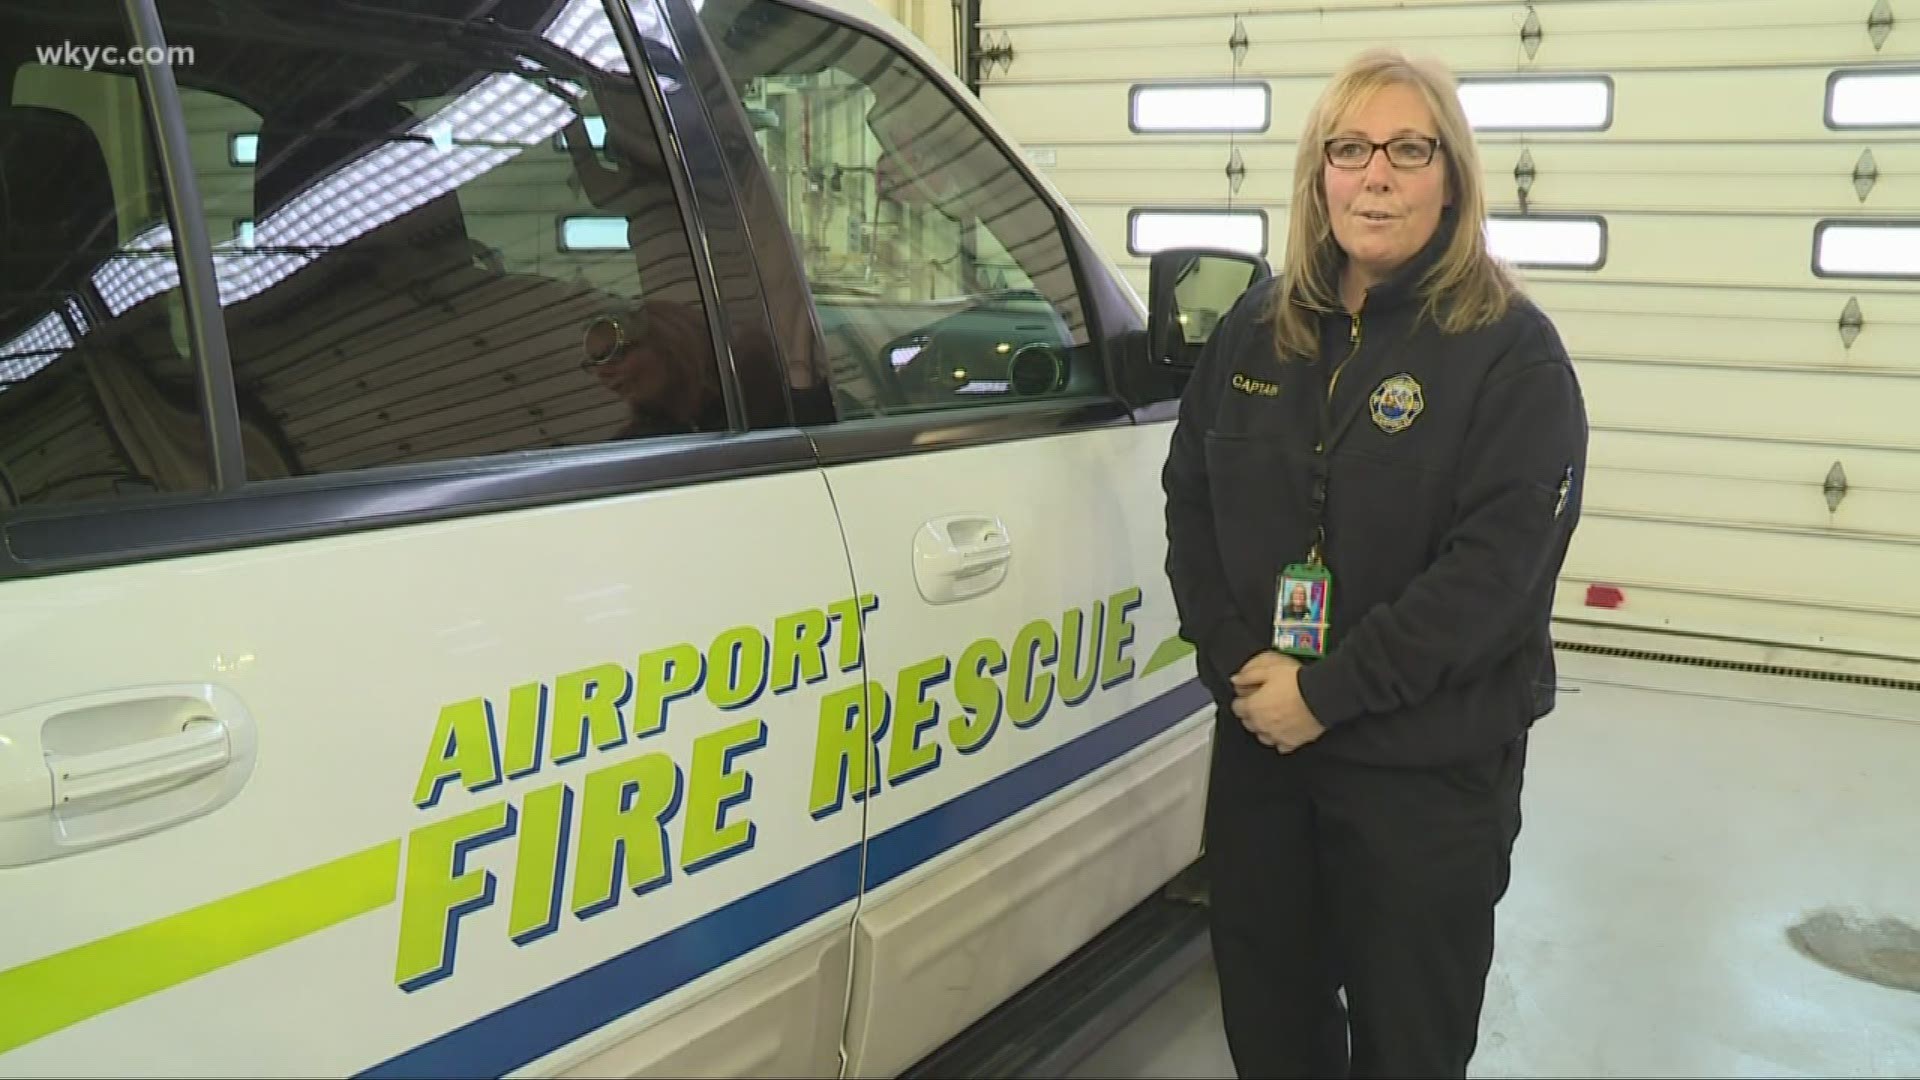 Moleterno is the first female captain of Cleveland Hopkins International Airport's Aircraft Rescue and Firefighting team. She has been with the team for 16 years.